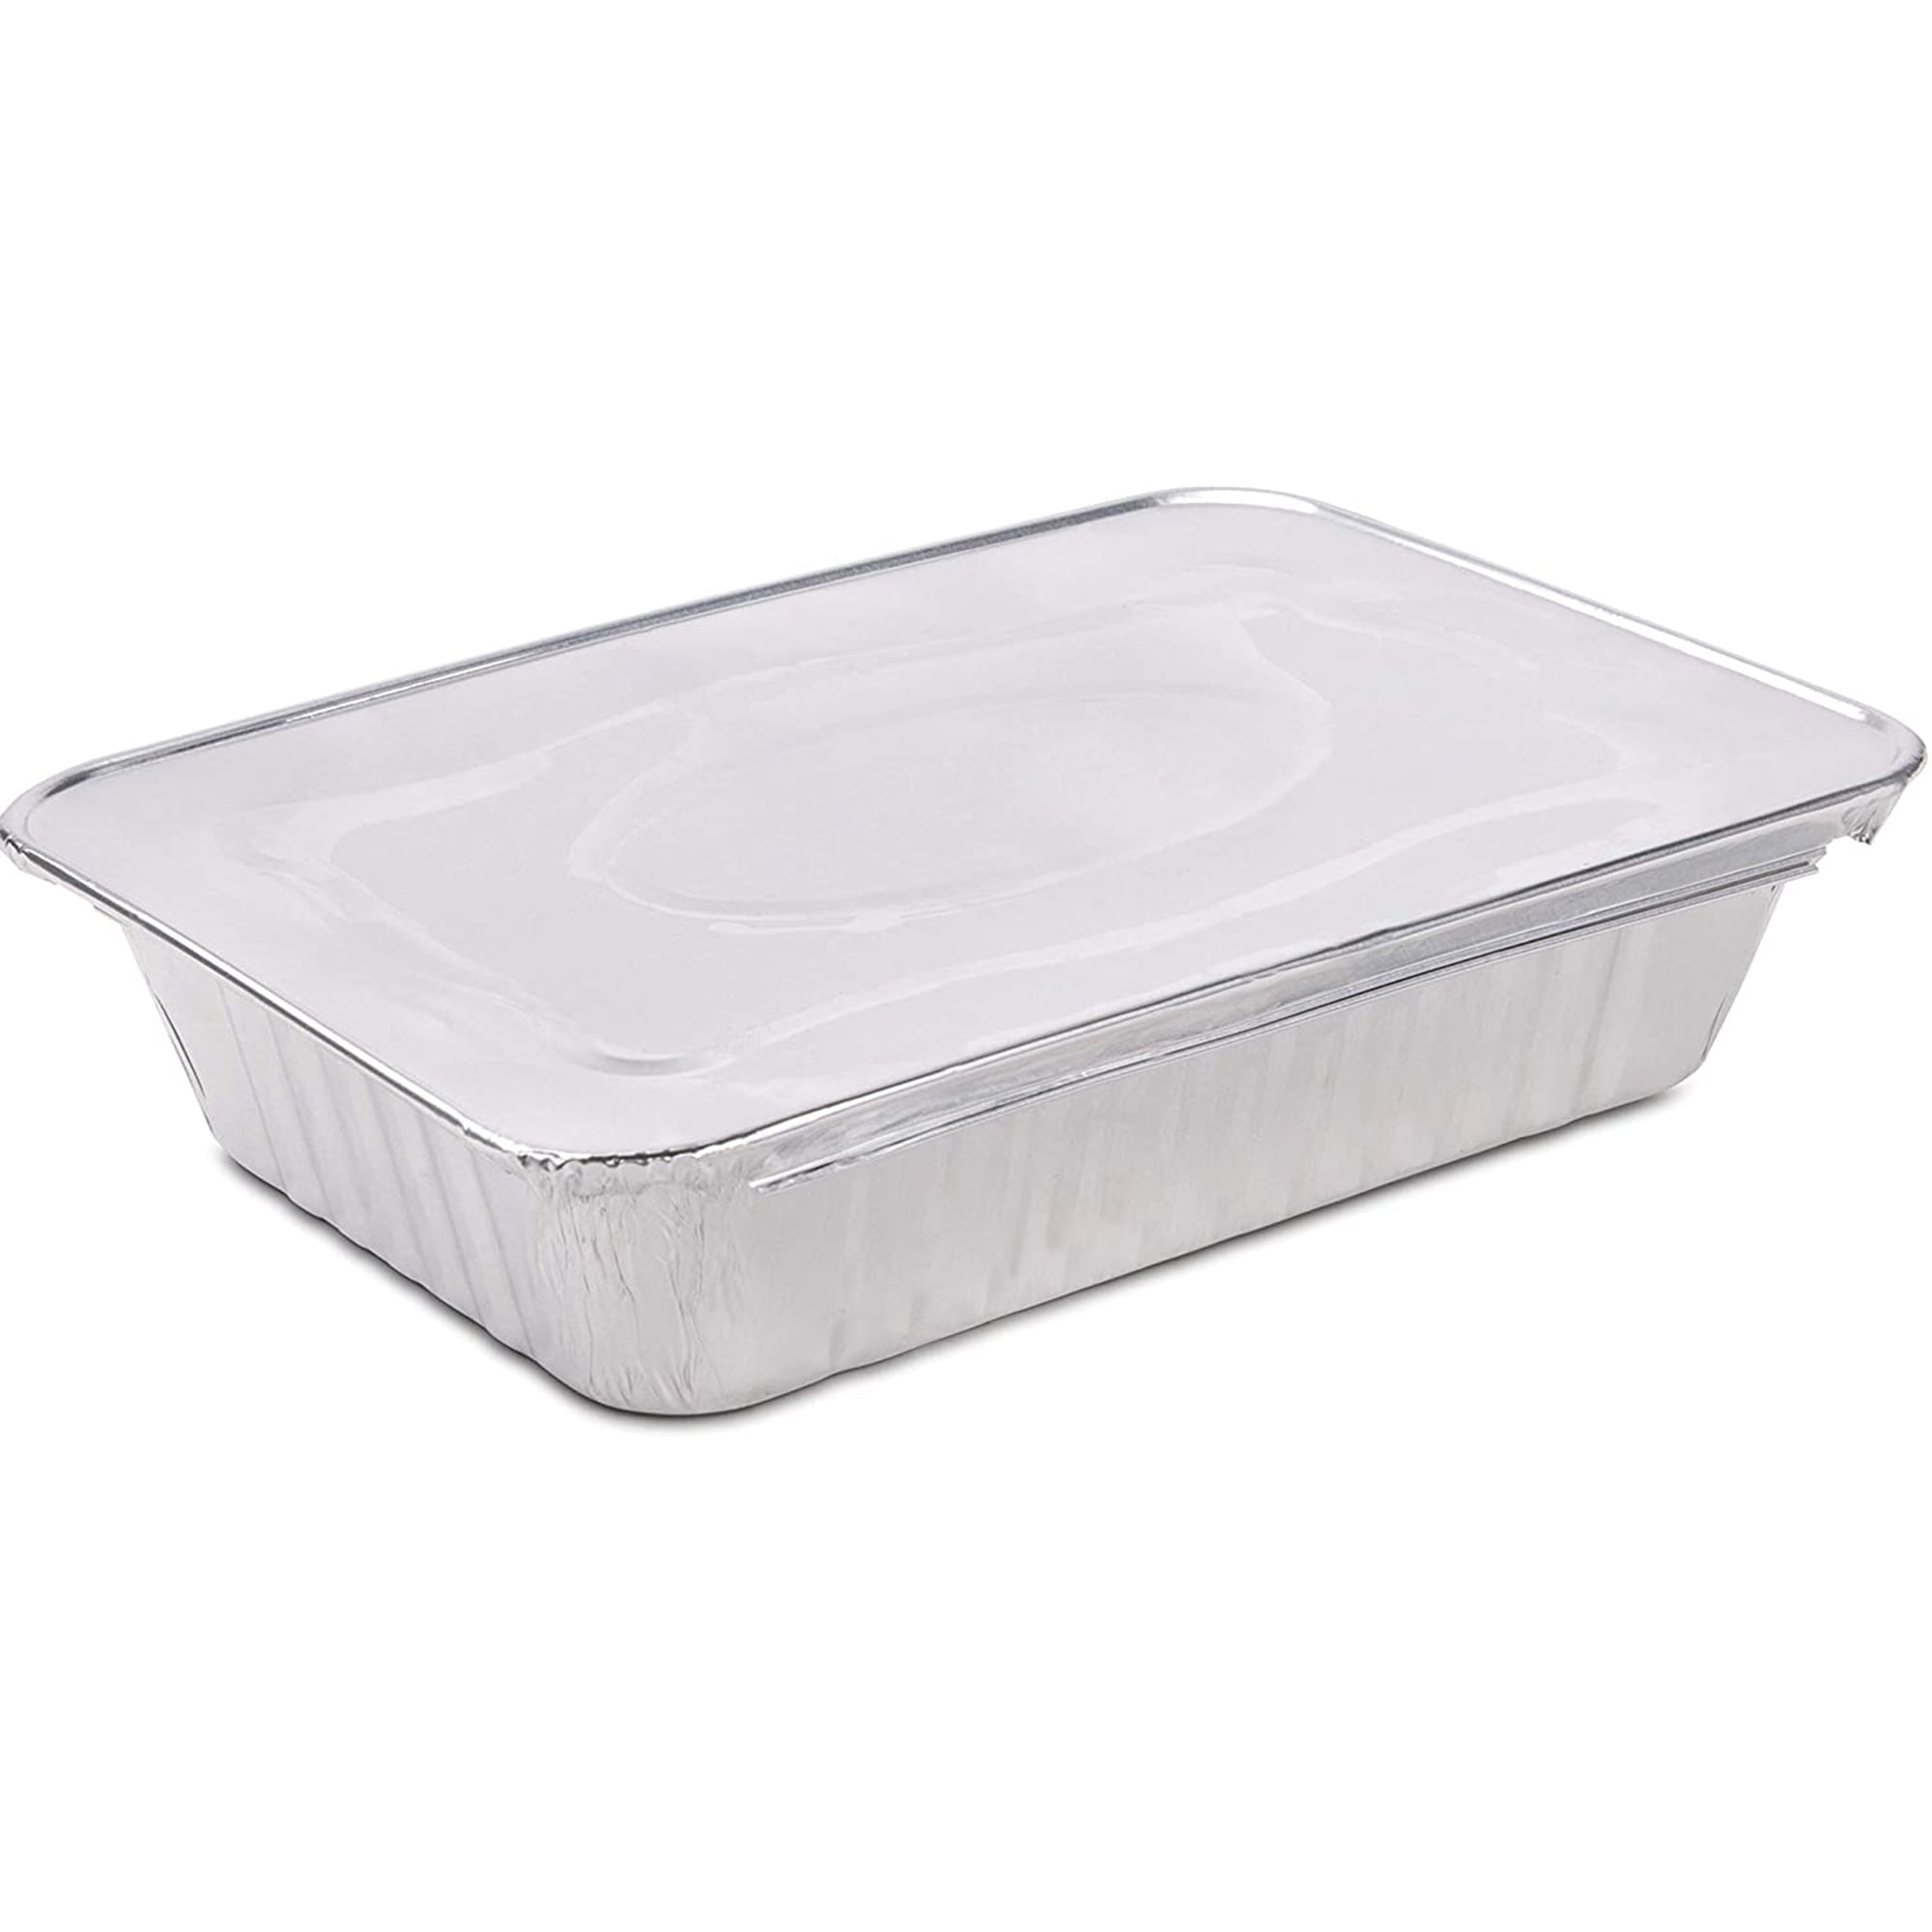 25pcs 8 Inches Round Aluminum Pans - Disposable Aluminum Foil Cake Trays -  Freezer & Oven Safe - For Baking, Cooking, Storage & Reheating